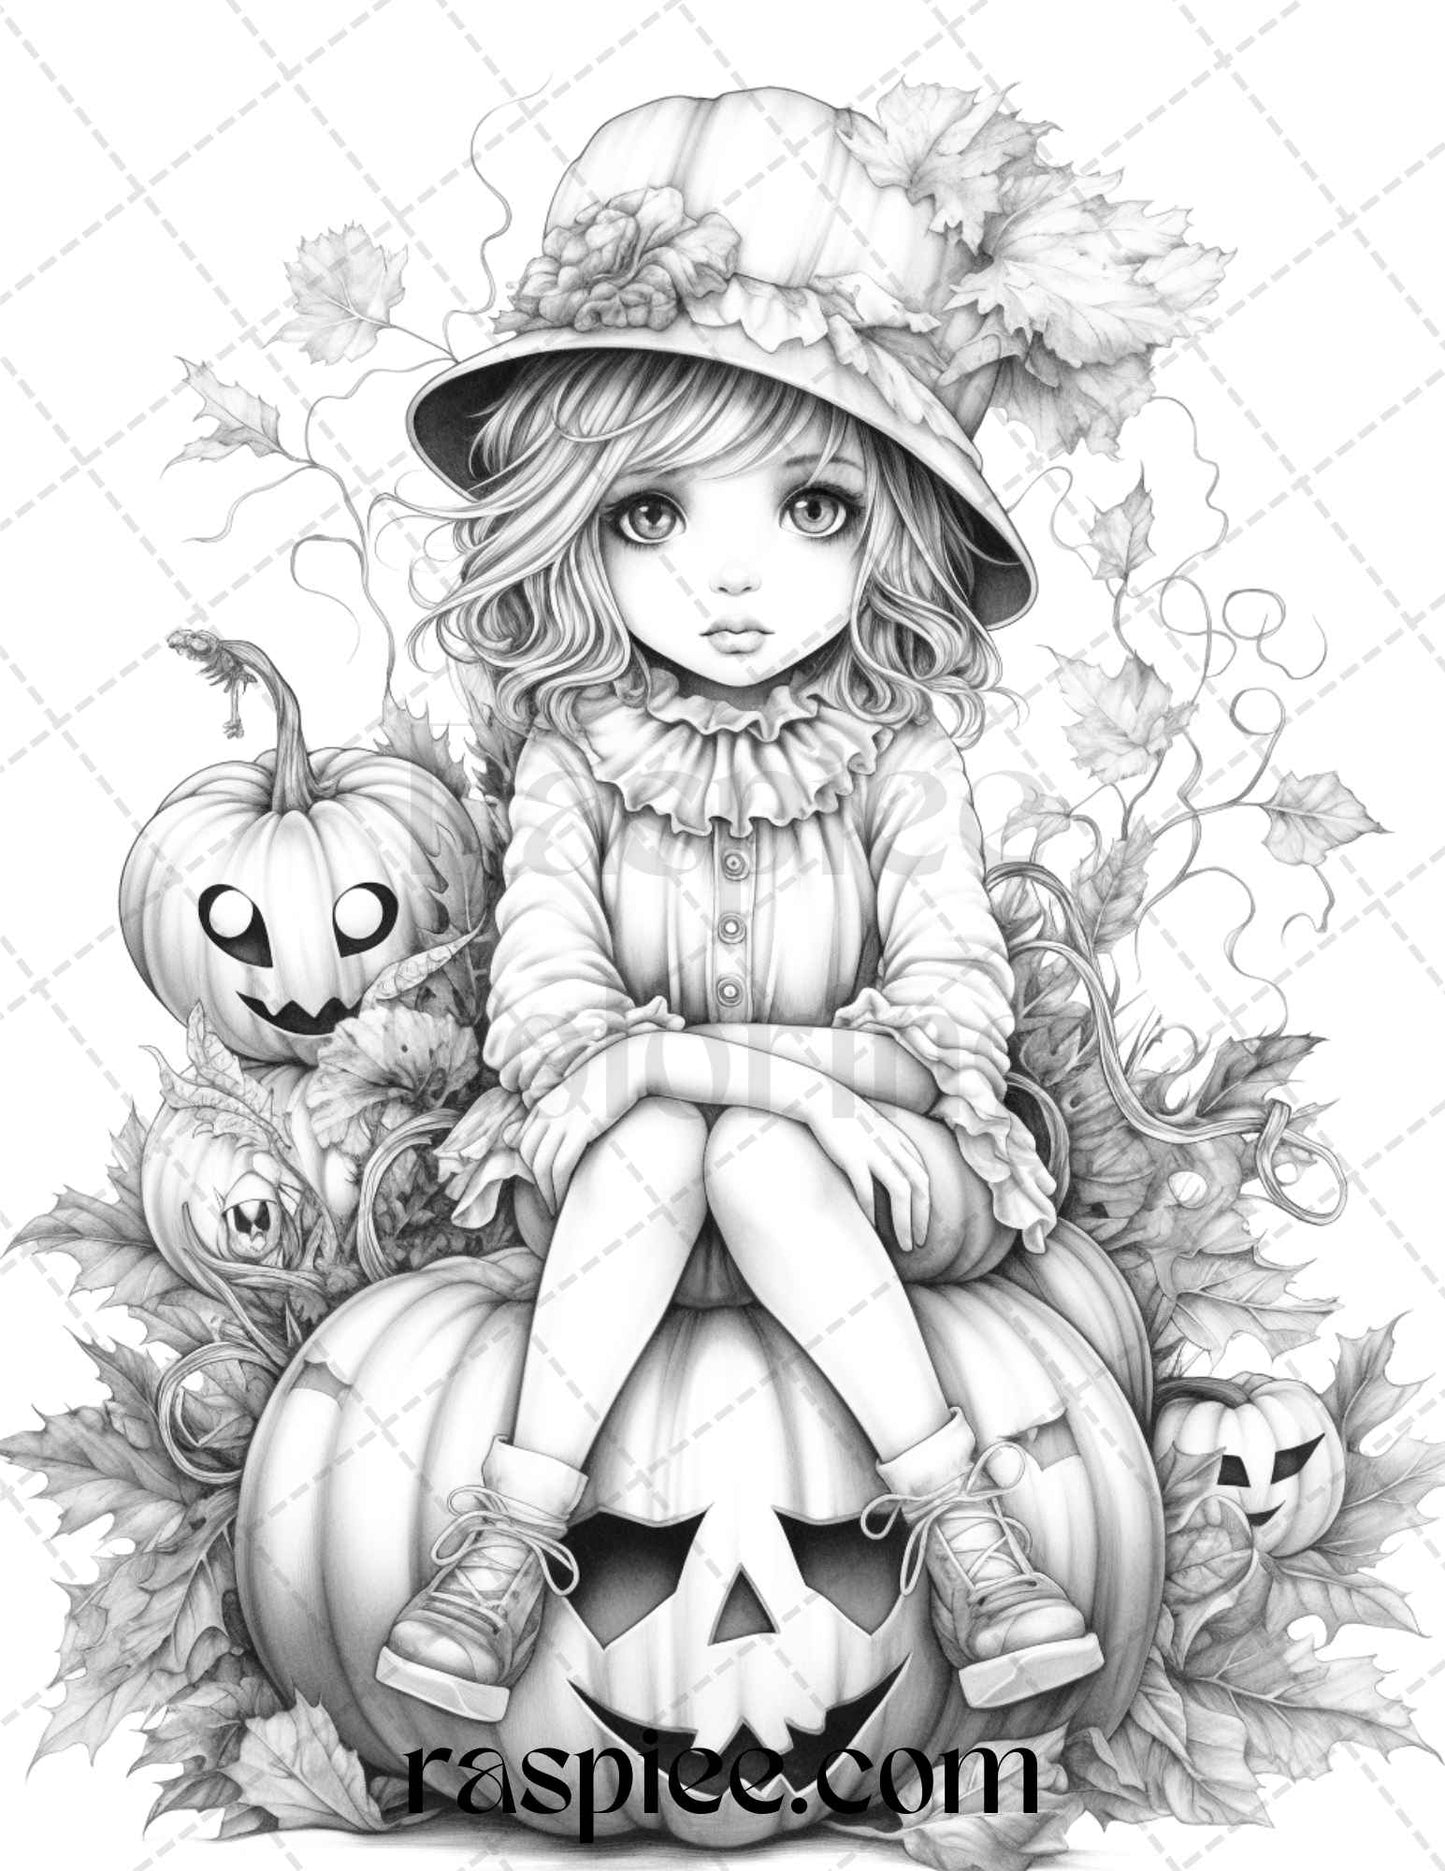 Pumpkin Fairy Girls Grayscale Coloring Pages, Halloween Art, Printable for Adults, Fantasy Illustrations, fall coloring pages for adults, halloween coloring pages for adults